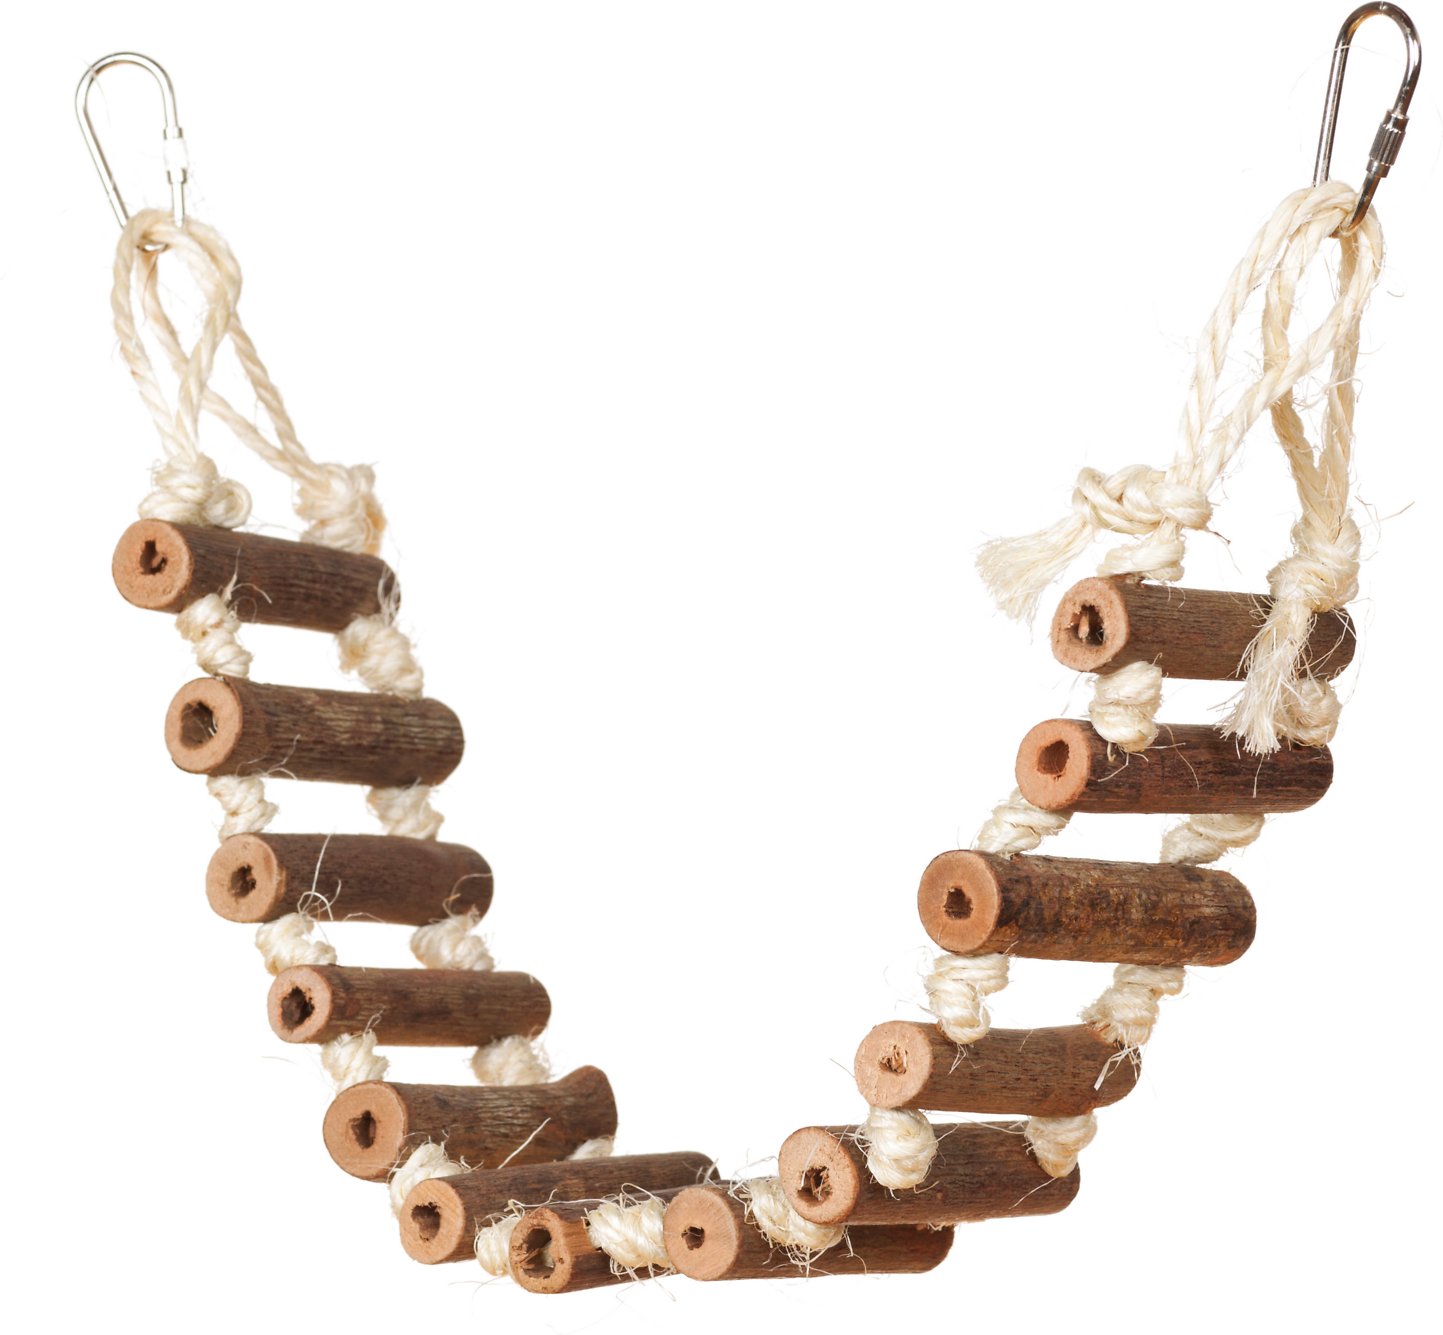 Prevue Pet Products Naturals Rope Ladder Bird Toy